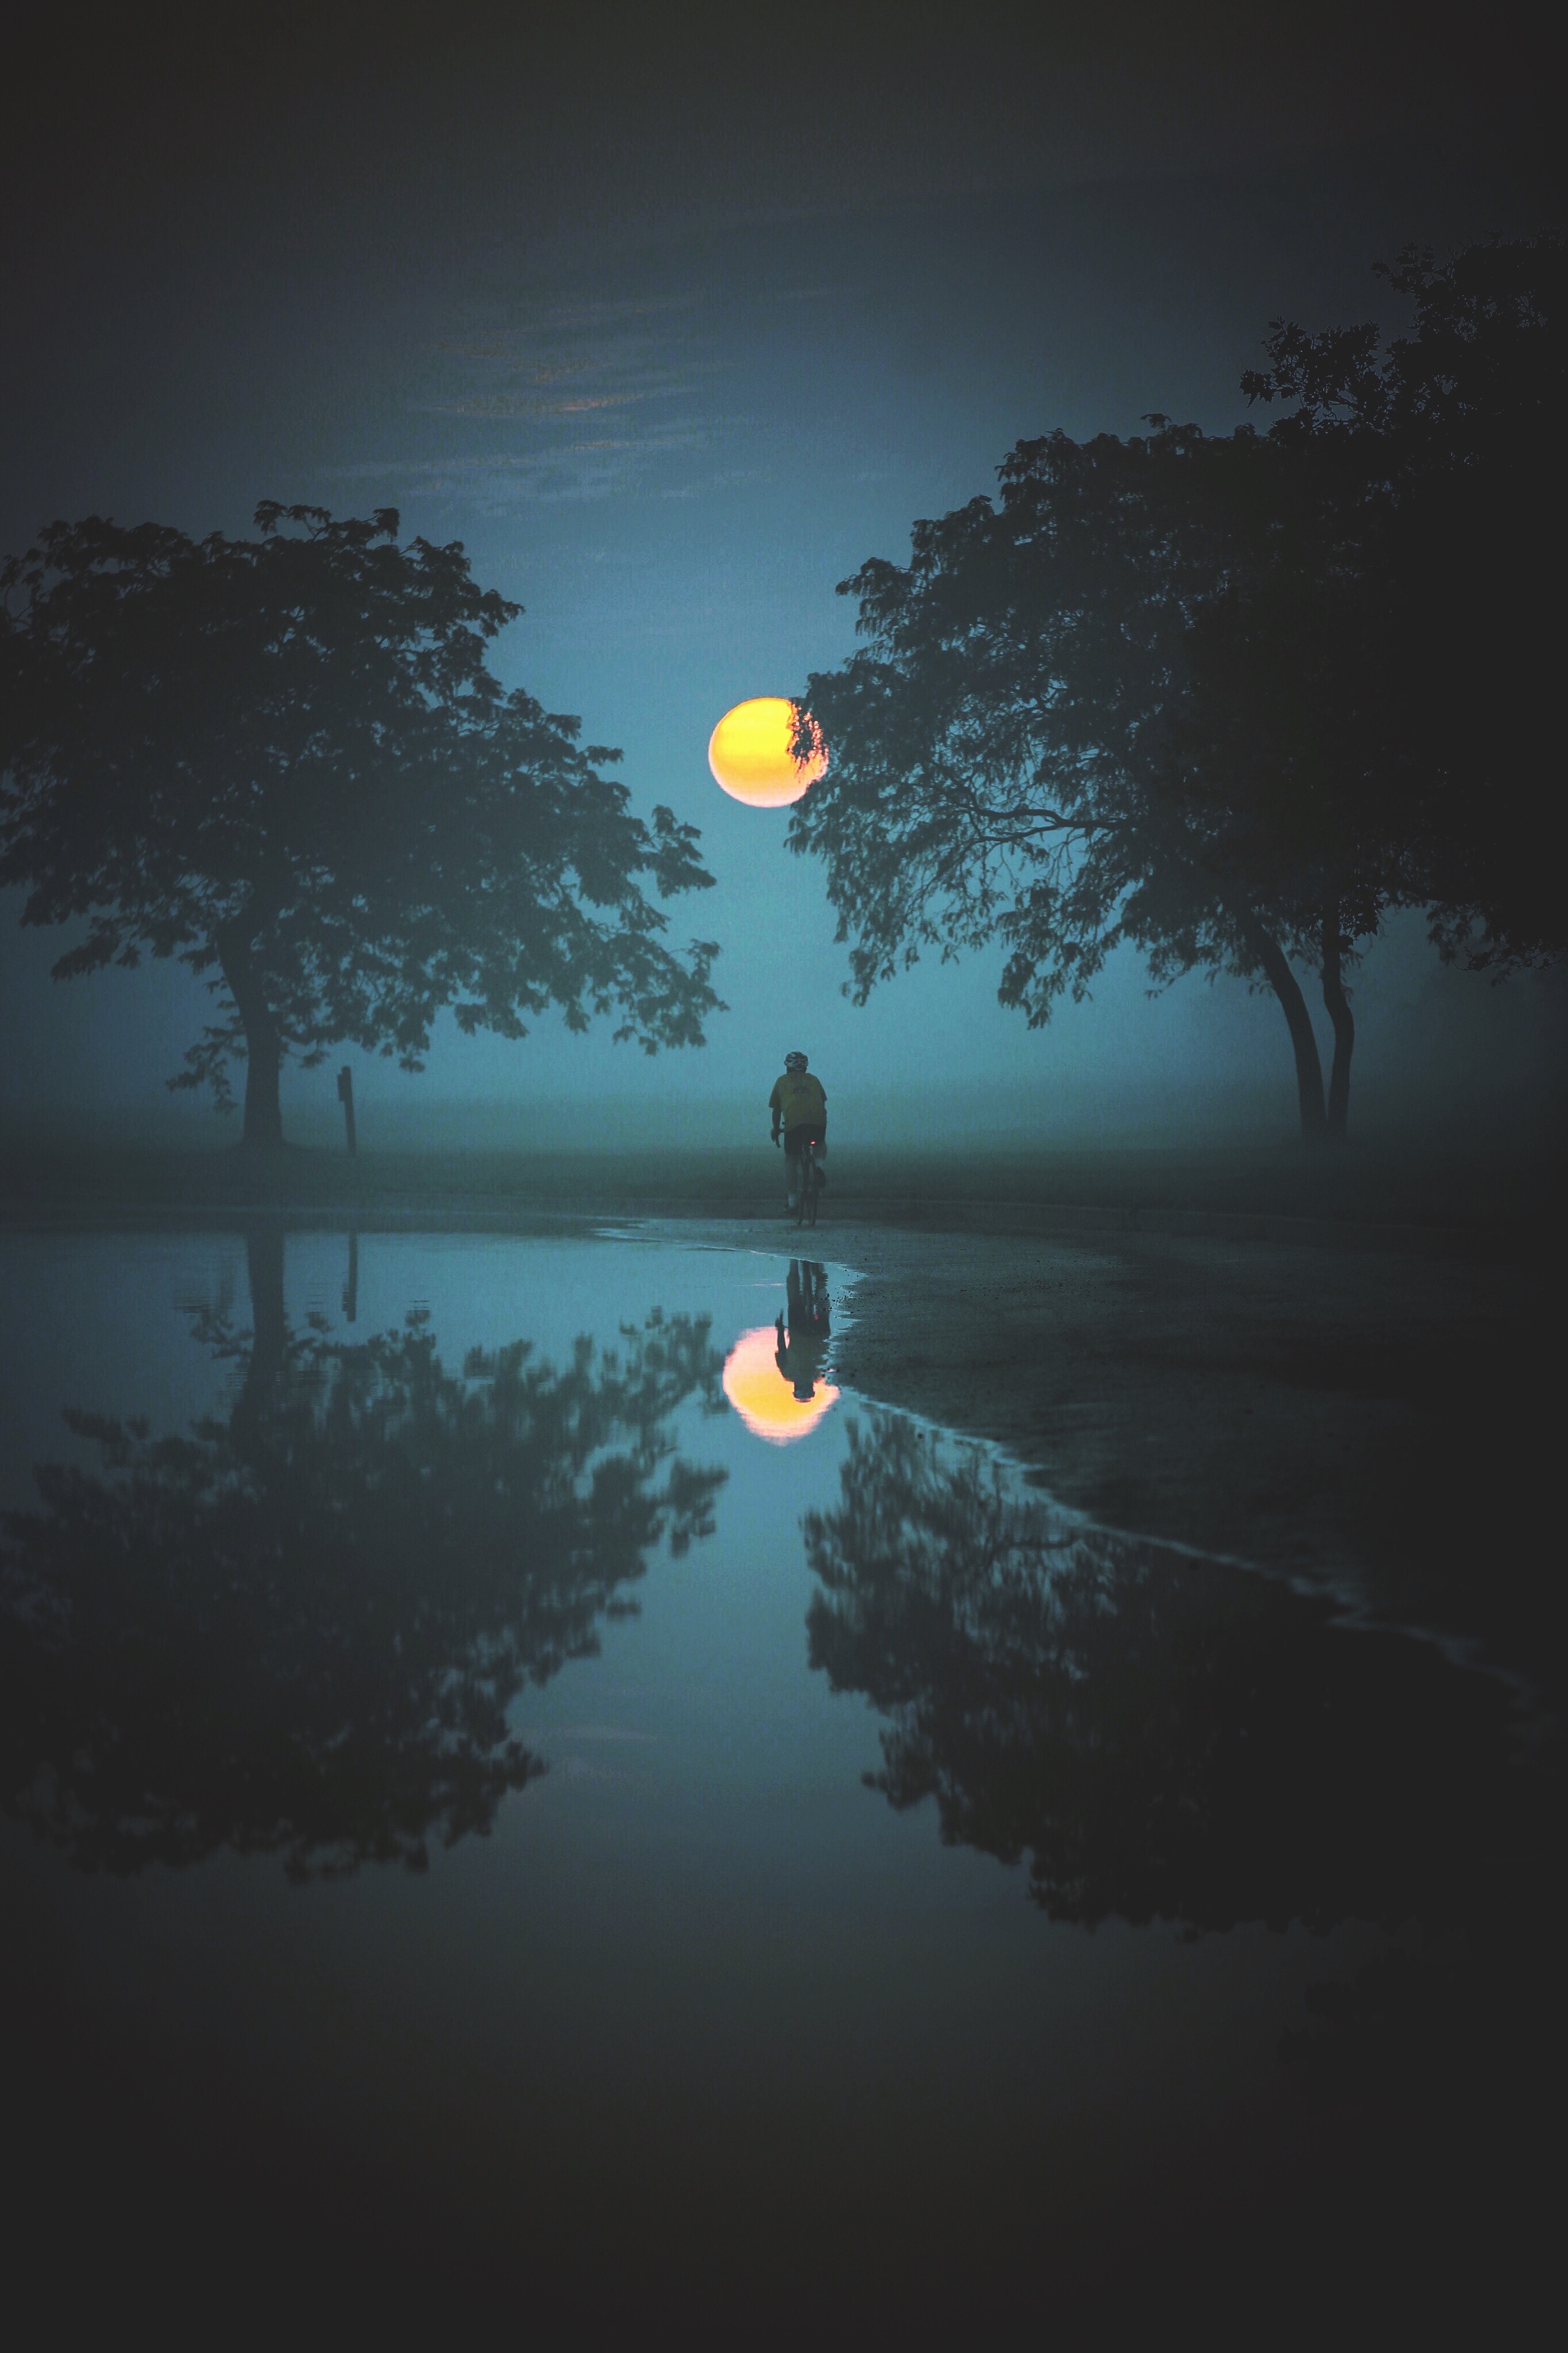 reflection, cyclist, moon, nature, water, trees, fog